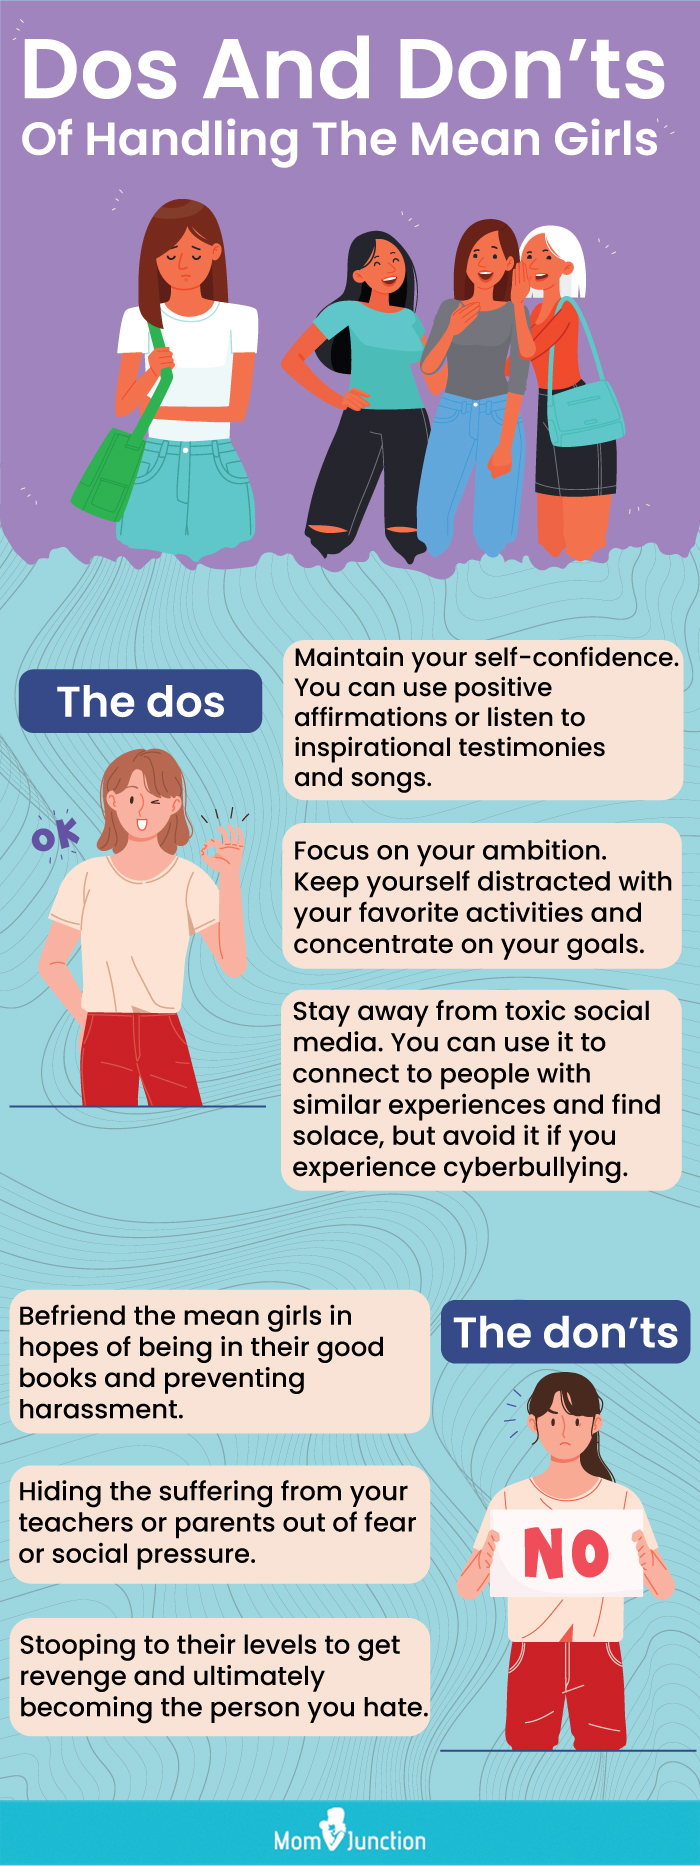 dos and donts of-Handling the mean girls (infographic)